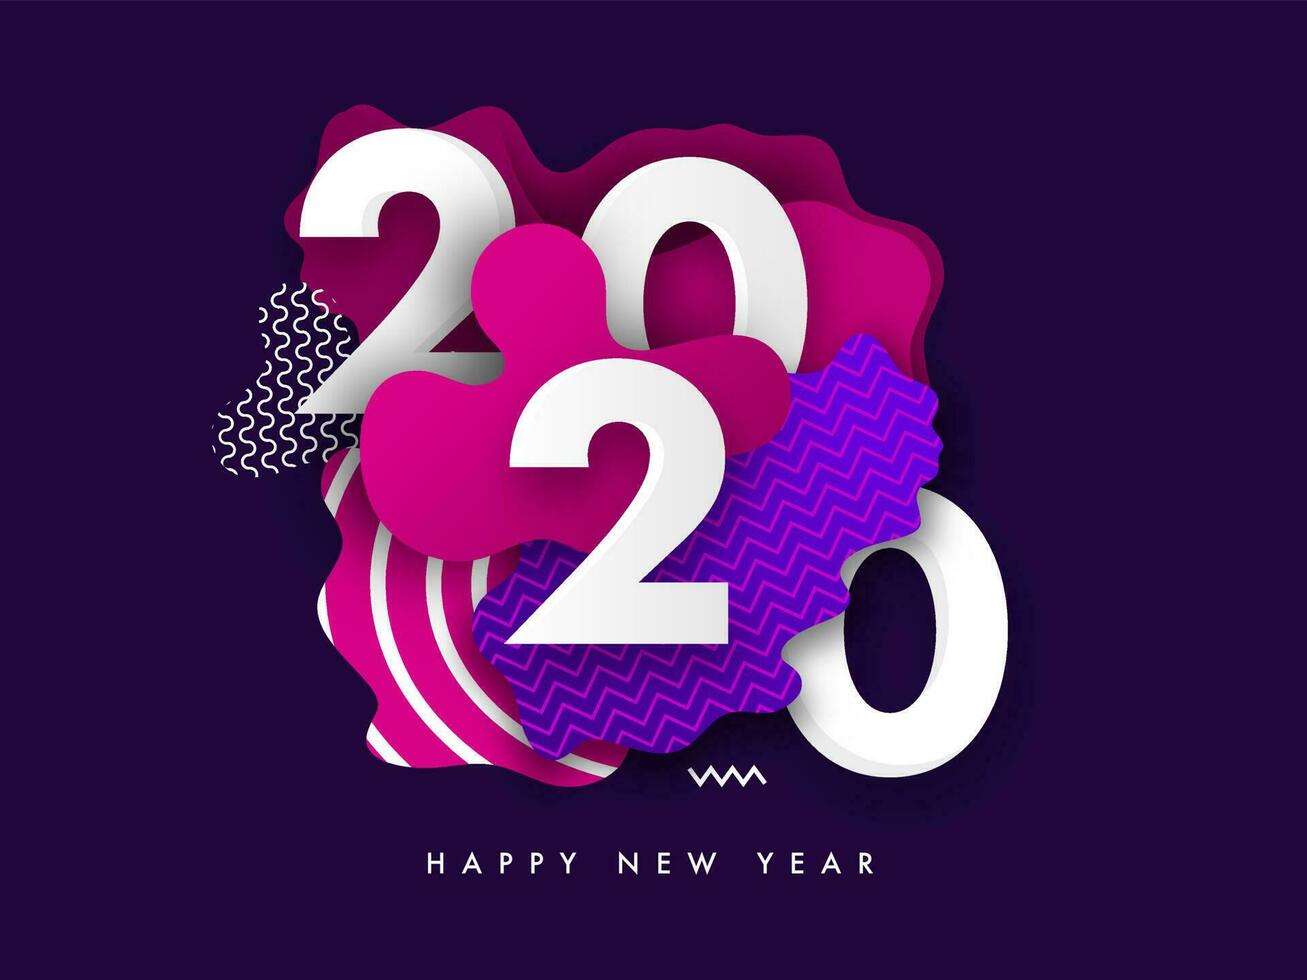 2020 text with paper cut abstract pattern on purple background for Happy New Year celebration concept. vector